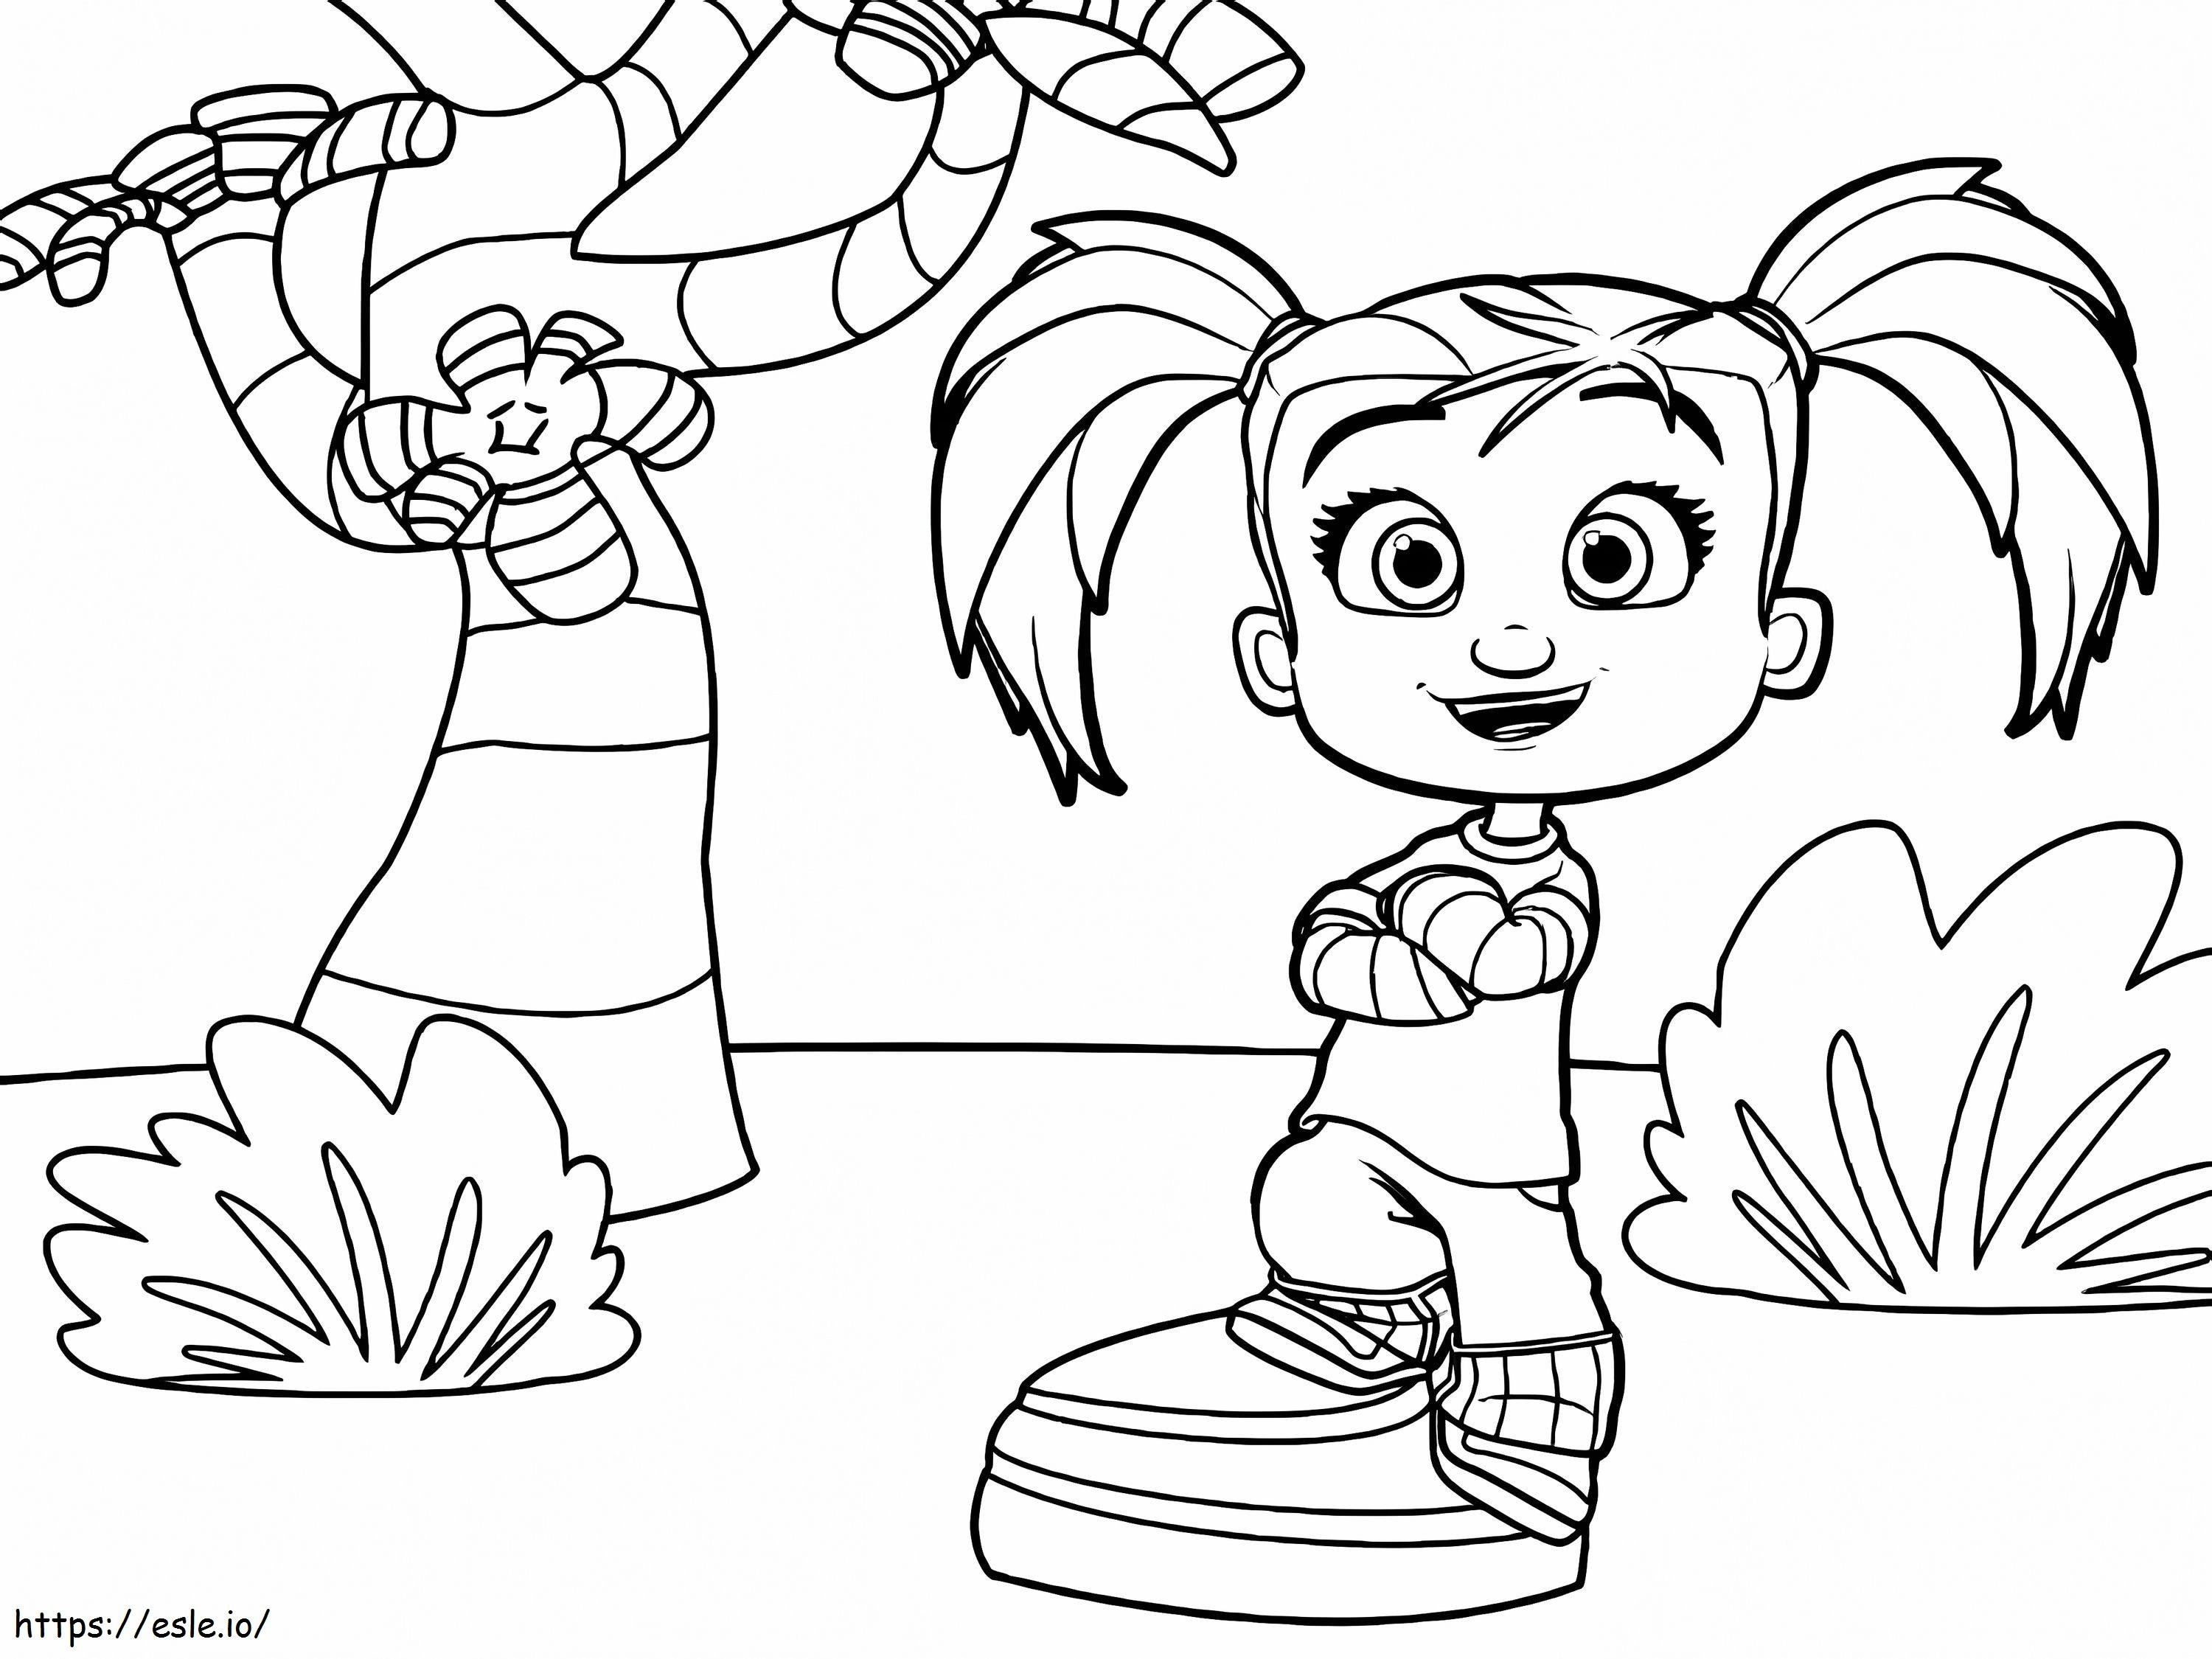 Cute Kate From Kate And Mim Mim coloring page